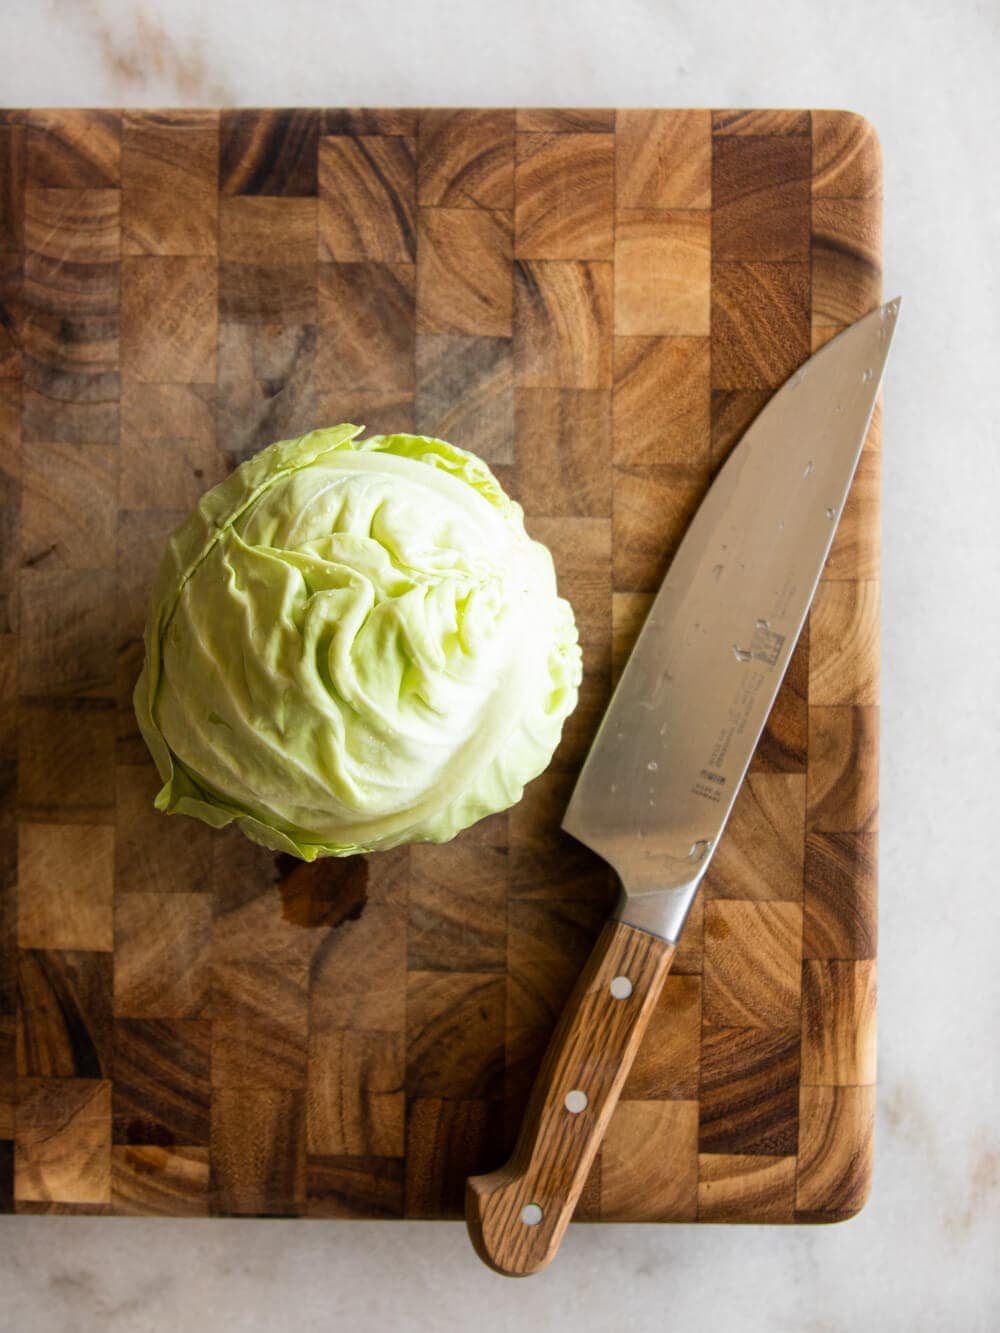 A head of cabbage sitting on a cutting board.